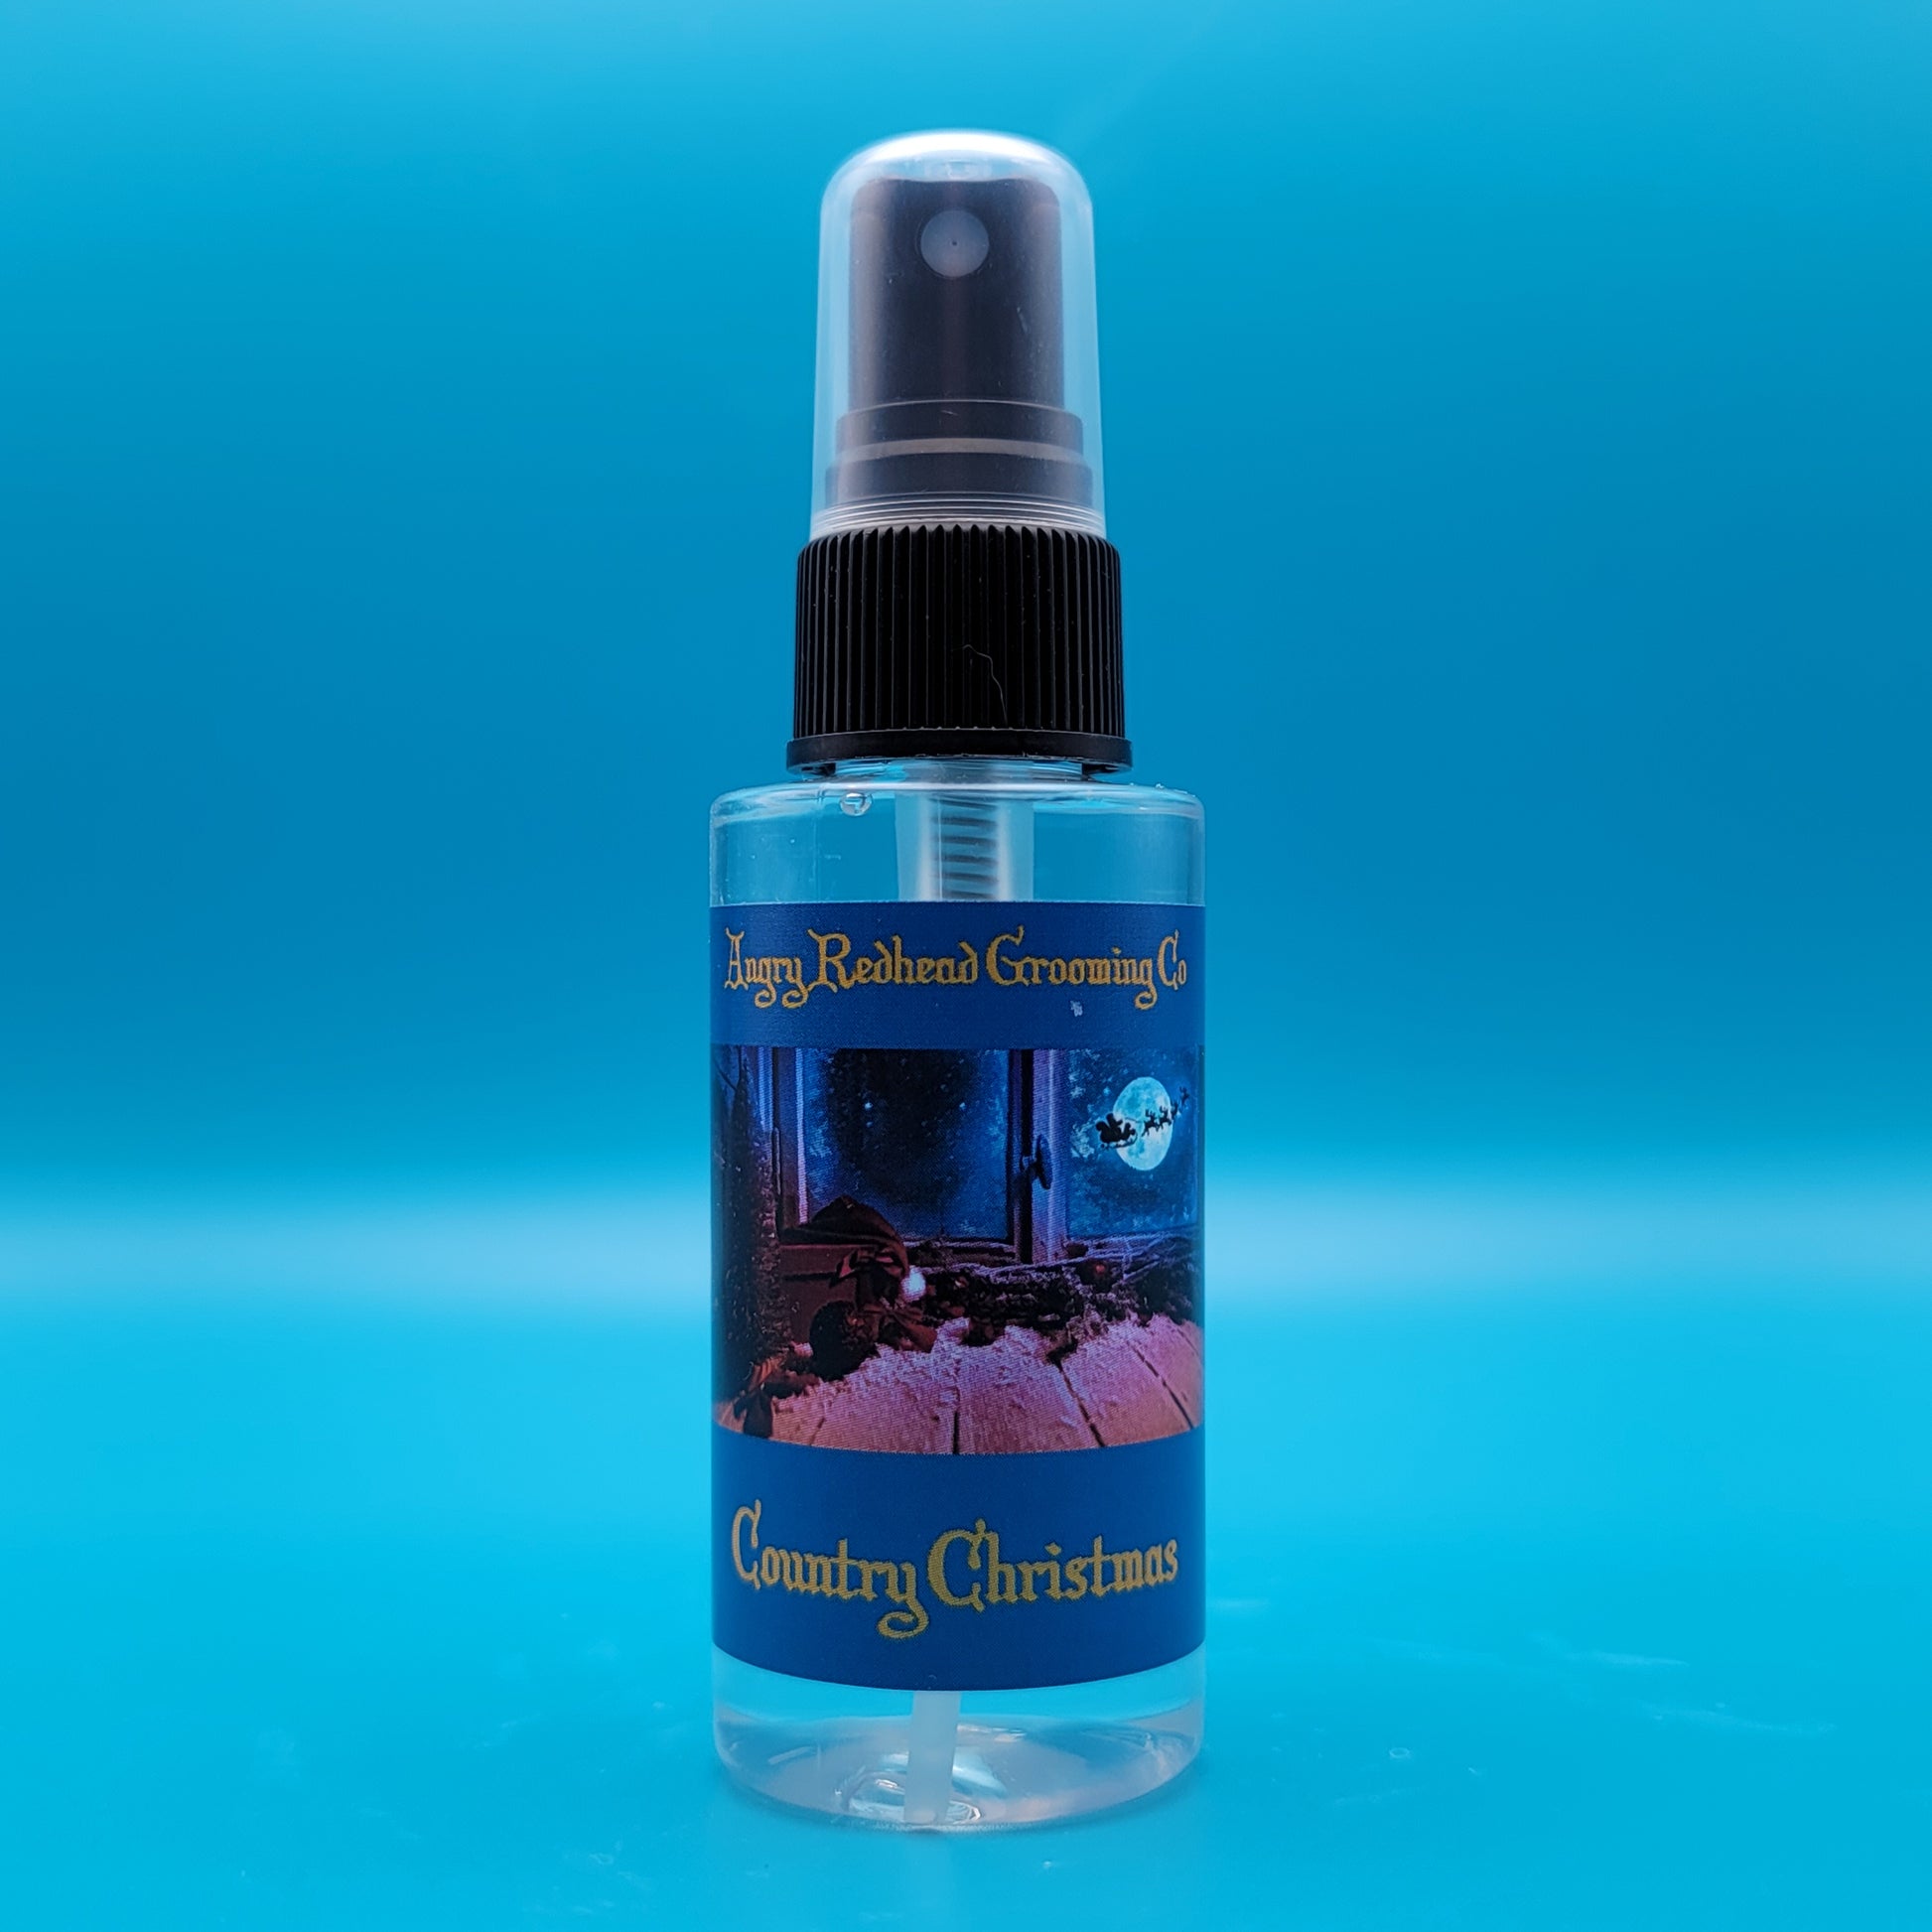 Country Christmas Body Mist by Angry Redhead Grooming Co - angryredheadgrooming.com